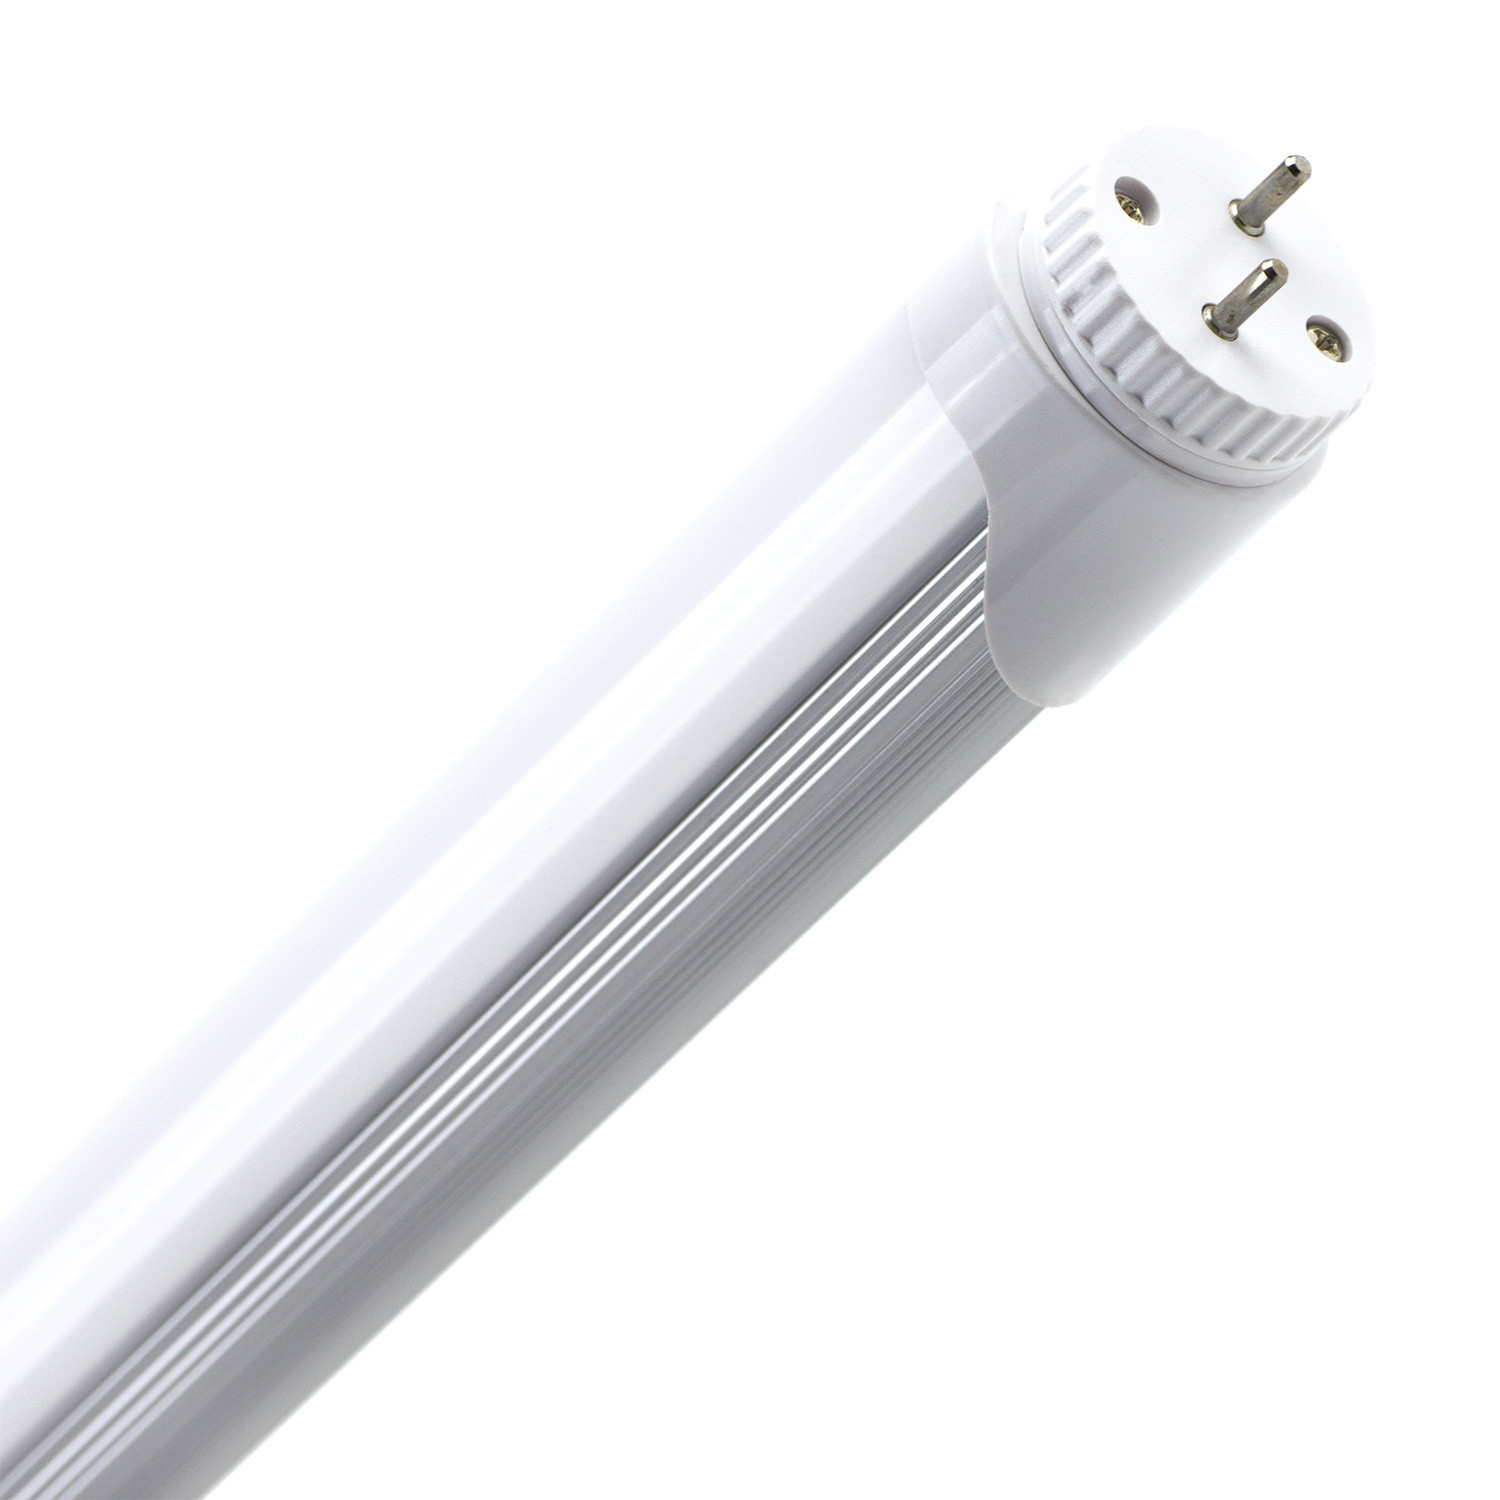 LED Tube T8 1500mm Einseitiger Anschluss 24W 120lm / W.